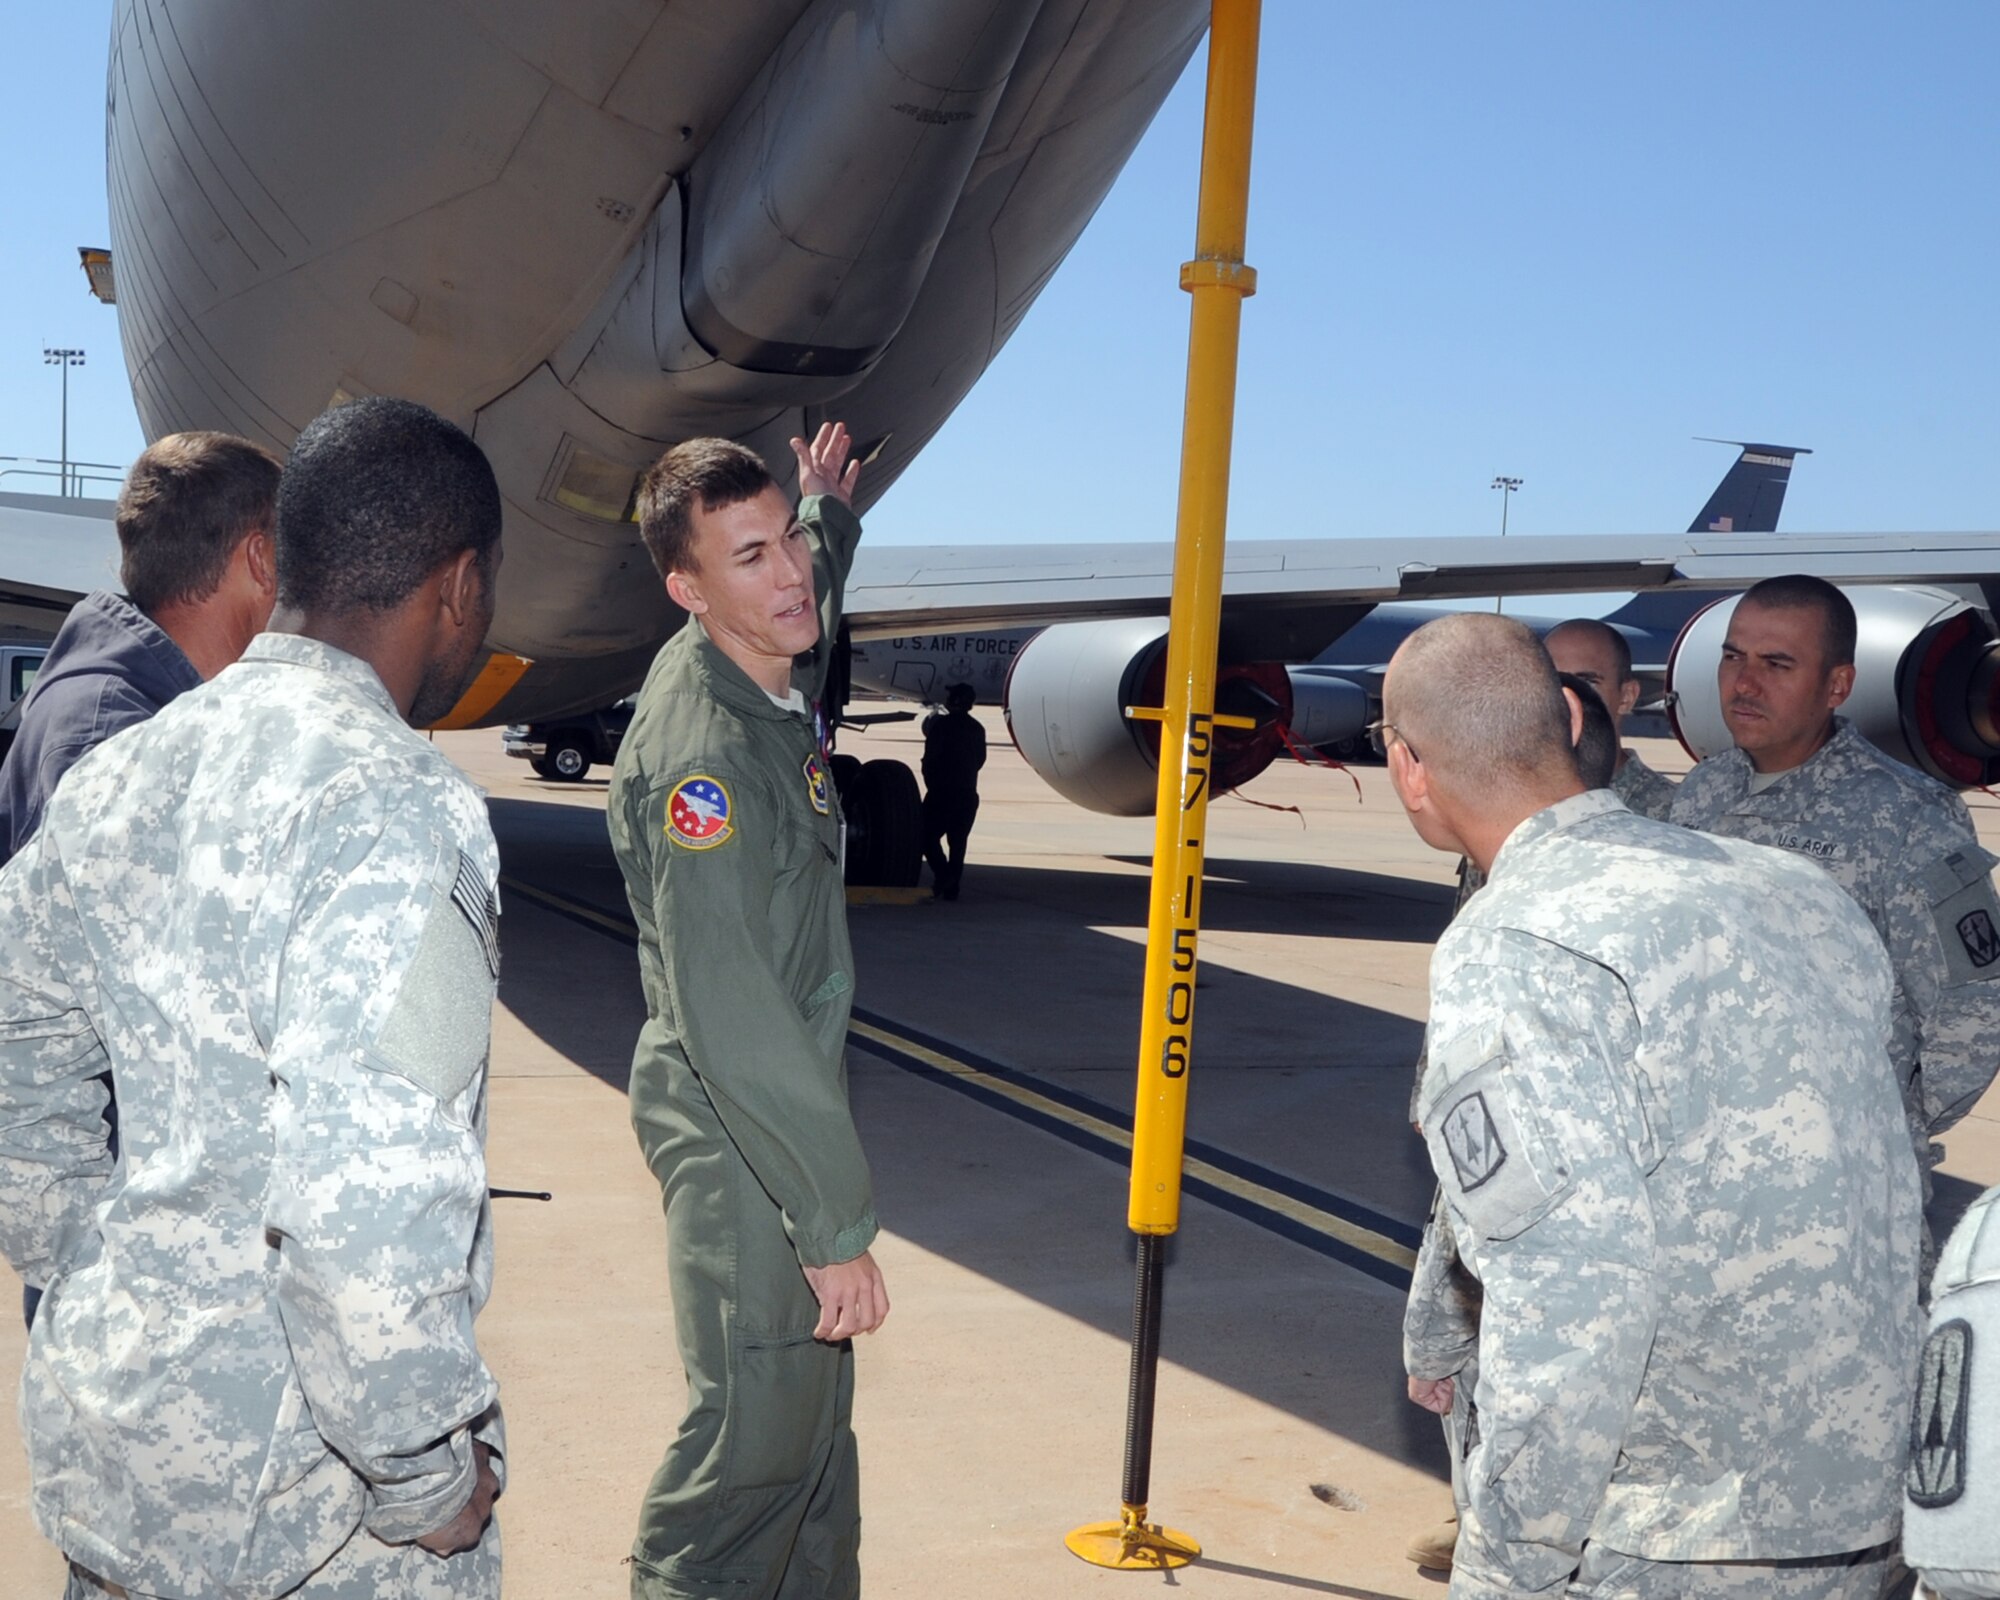 ALTUS AIR FORCE BASE, Okla. – Staff Sgt. Chris Joyce, 54th Air Refueling Squadron boom operator, explains to soldiers from the 4th Battalion 3rd Air Defense Artillery, Fort Sill, Okla., about how the boom on a KC-135 Stratotanker is used to refuel other aircraft, during a tour Oct. 20, 2011. The 4-3 ADA BN brought about 250 soldiers to Altus AFB completing a 10-day training event that tested communications between multiple Patriot missile battery sites and evaluated how the unit would handle scenarios that could be encountered in a deployed environment. (U.S. Air Force photo by Airman 1st Class Kenneth W. Norman / Released / 97th Air Mobility Wing Public Affairs)